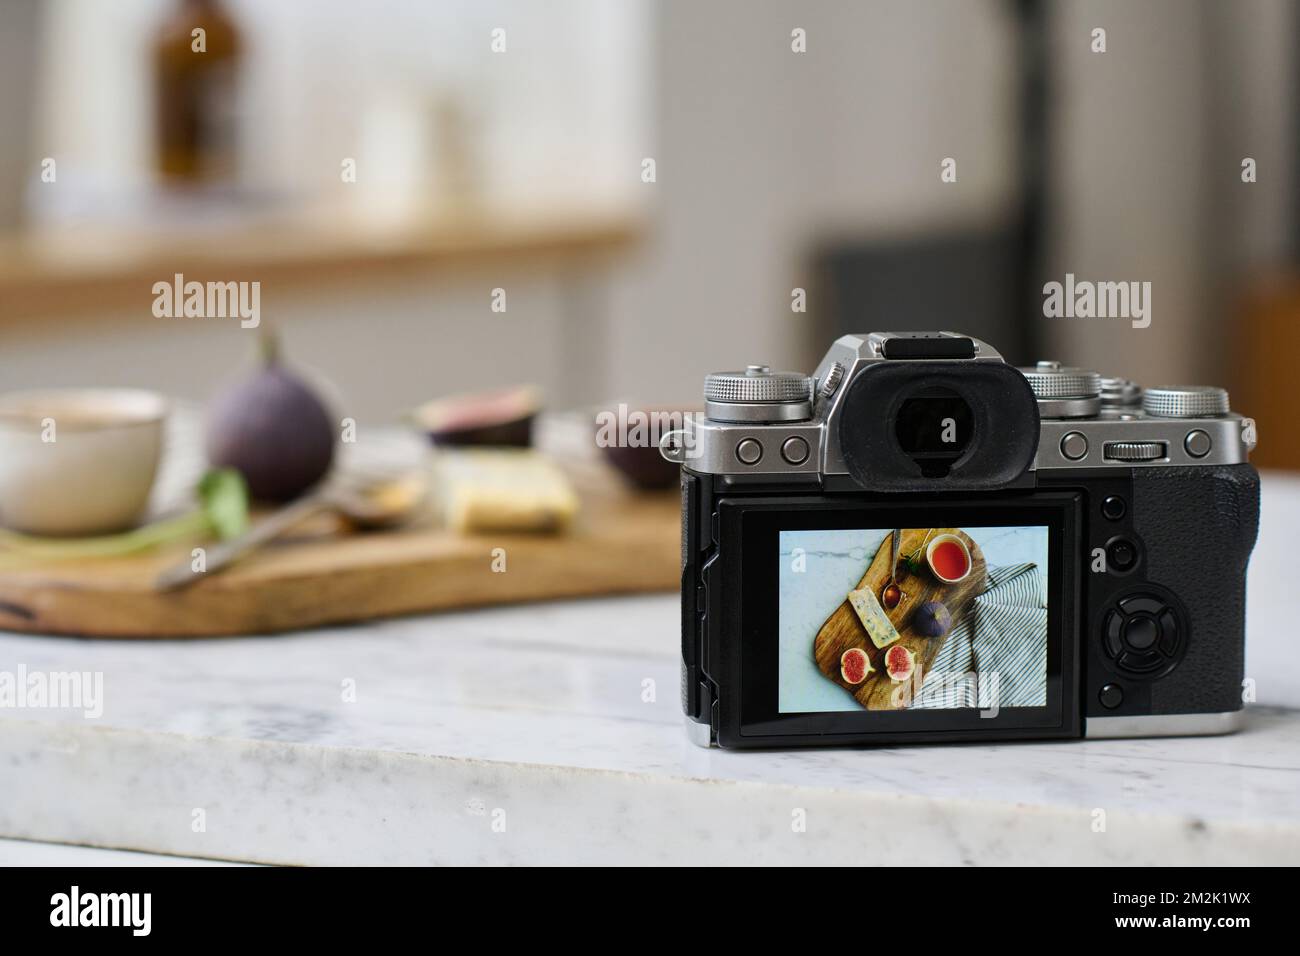 Close-up of professional photo camera on table with still life picture on screen using for photographing professional photos Stock Photo